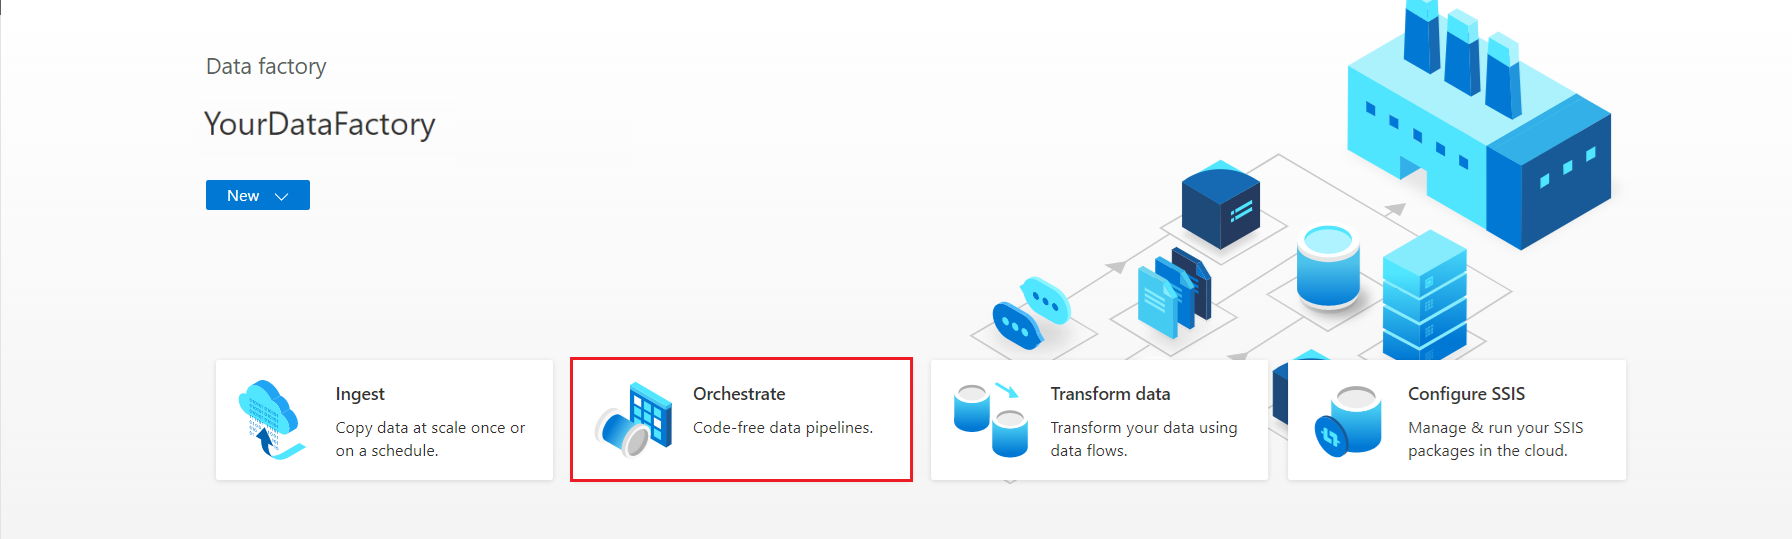 Screenshot showing the Orchestrate page of Azure Data Factory.